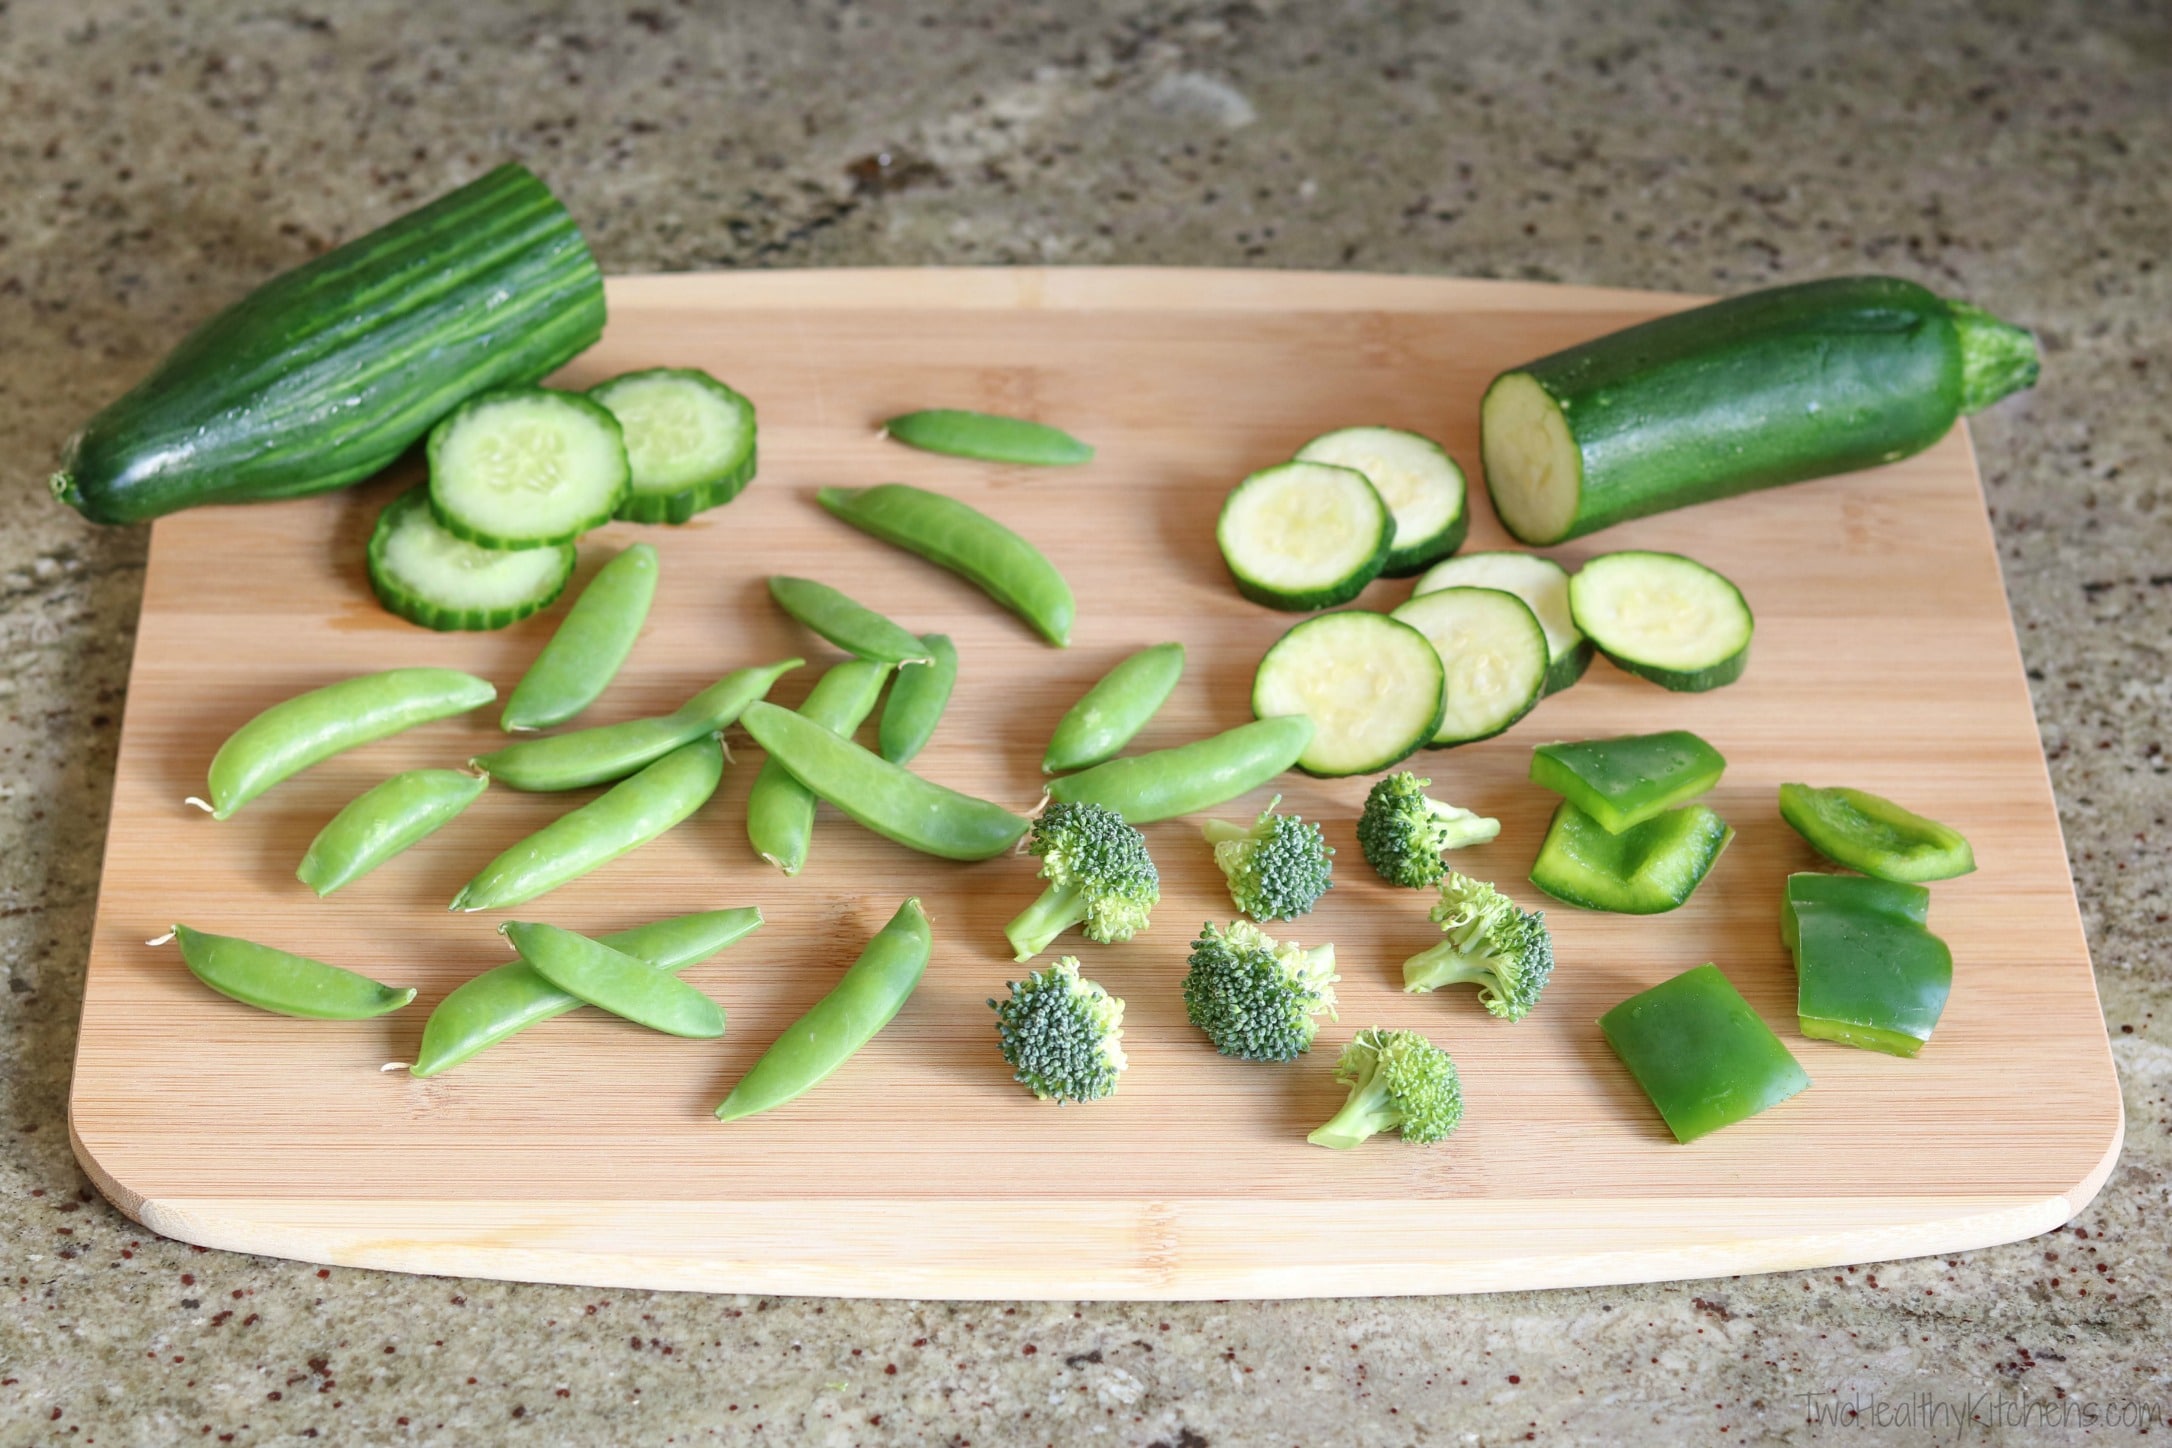 Green veggies arrayed on bamboo cutting board, ready to be added to skewers.